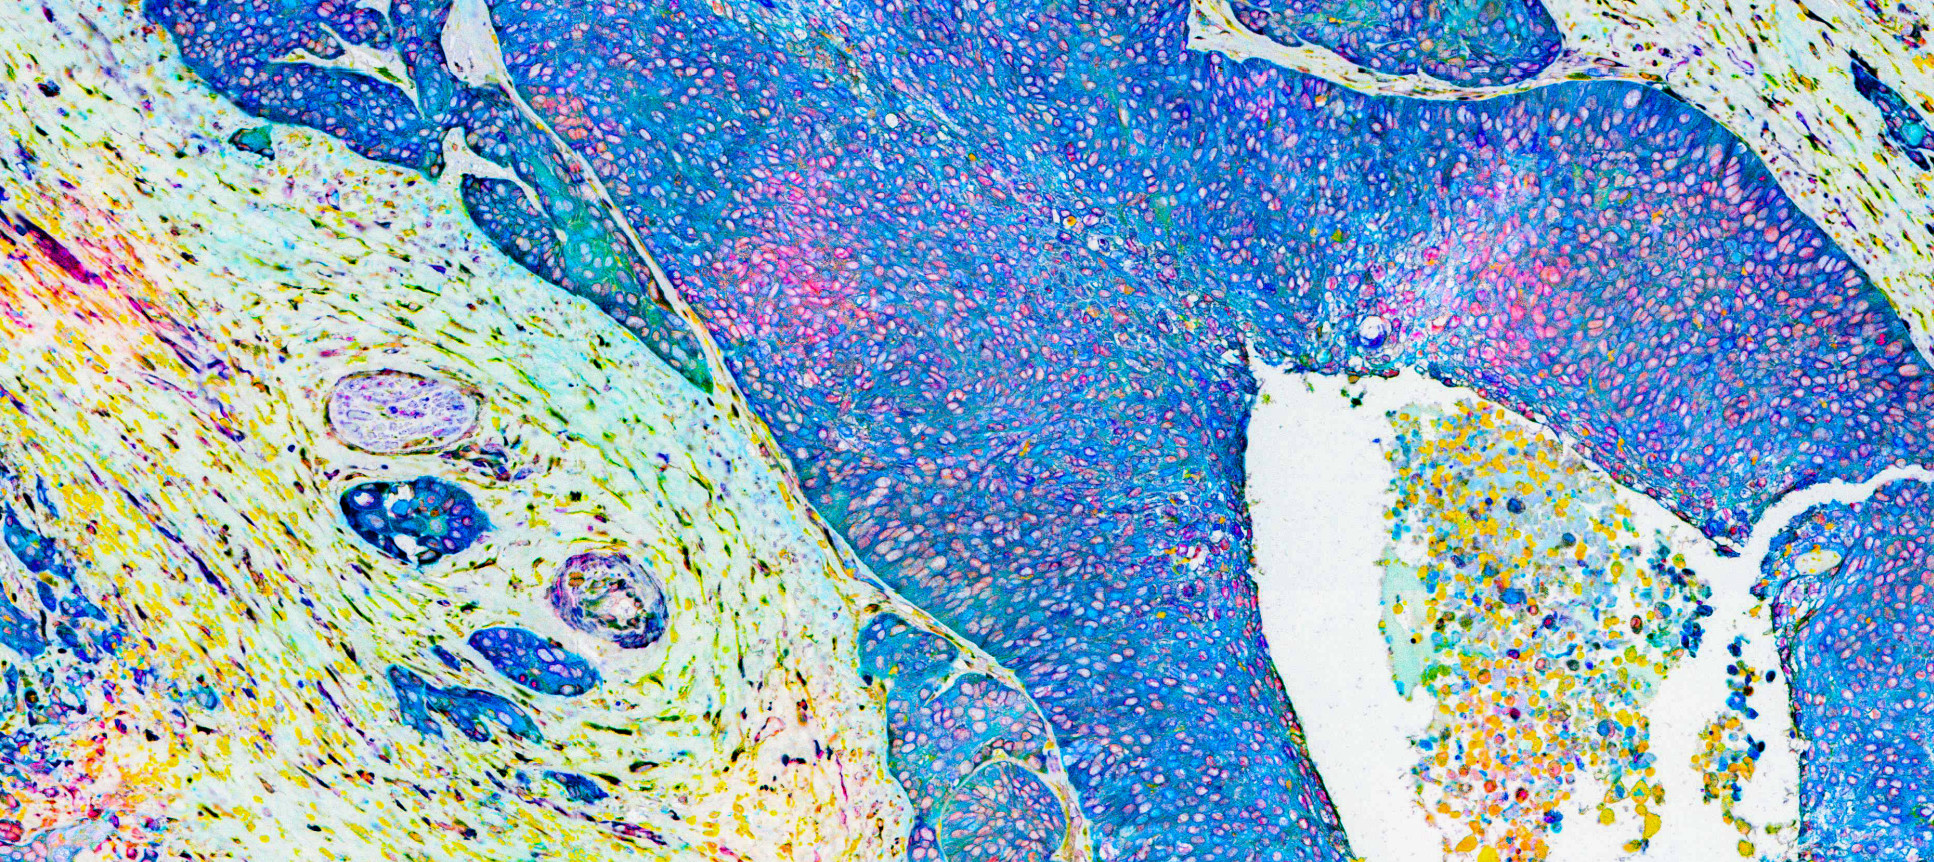 A false color image of deeply shaded cancer cells surrounded by normal tissue